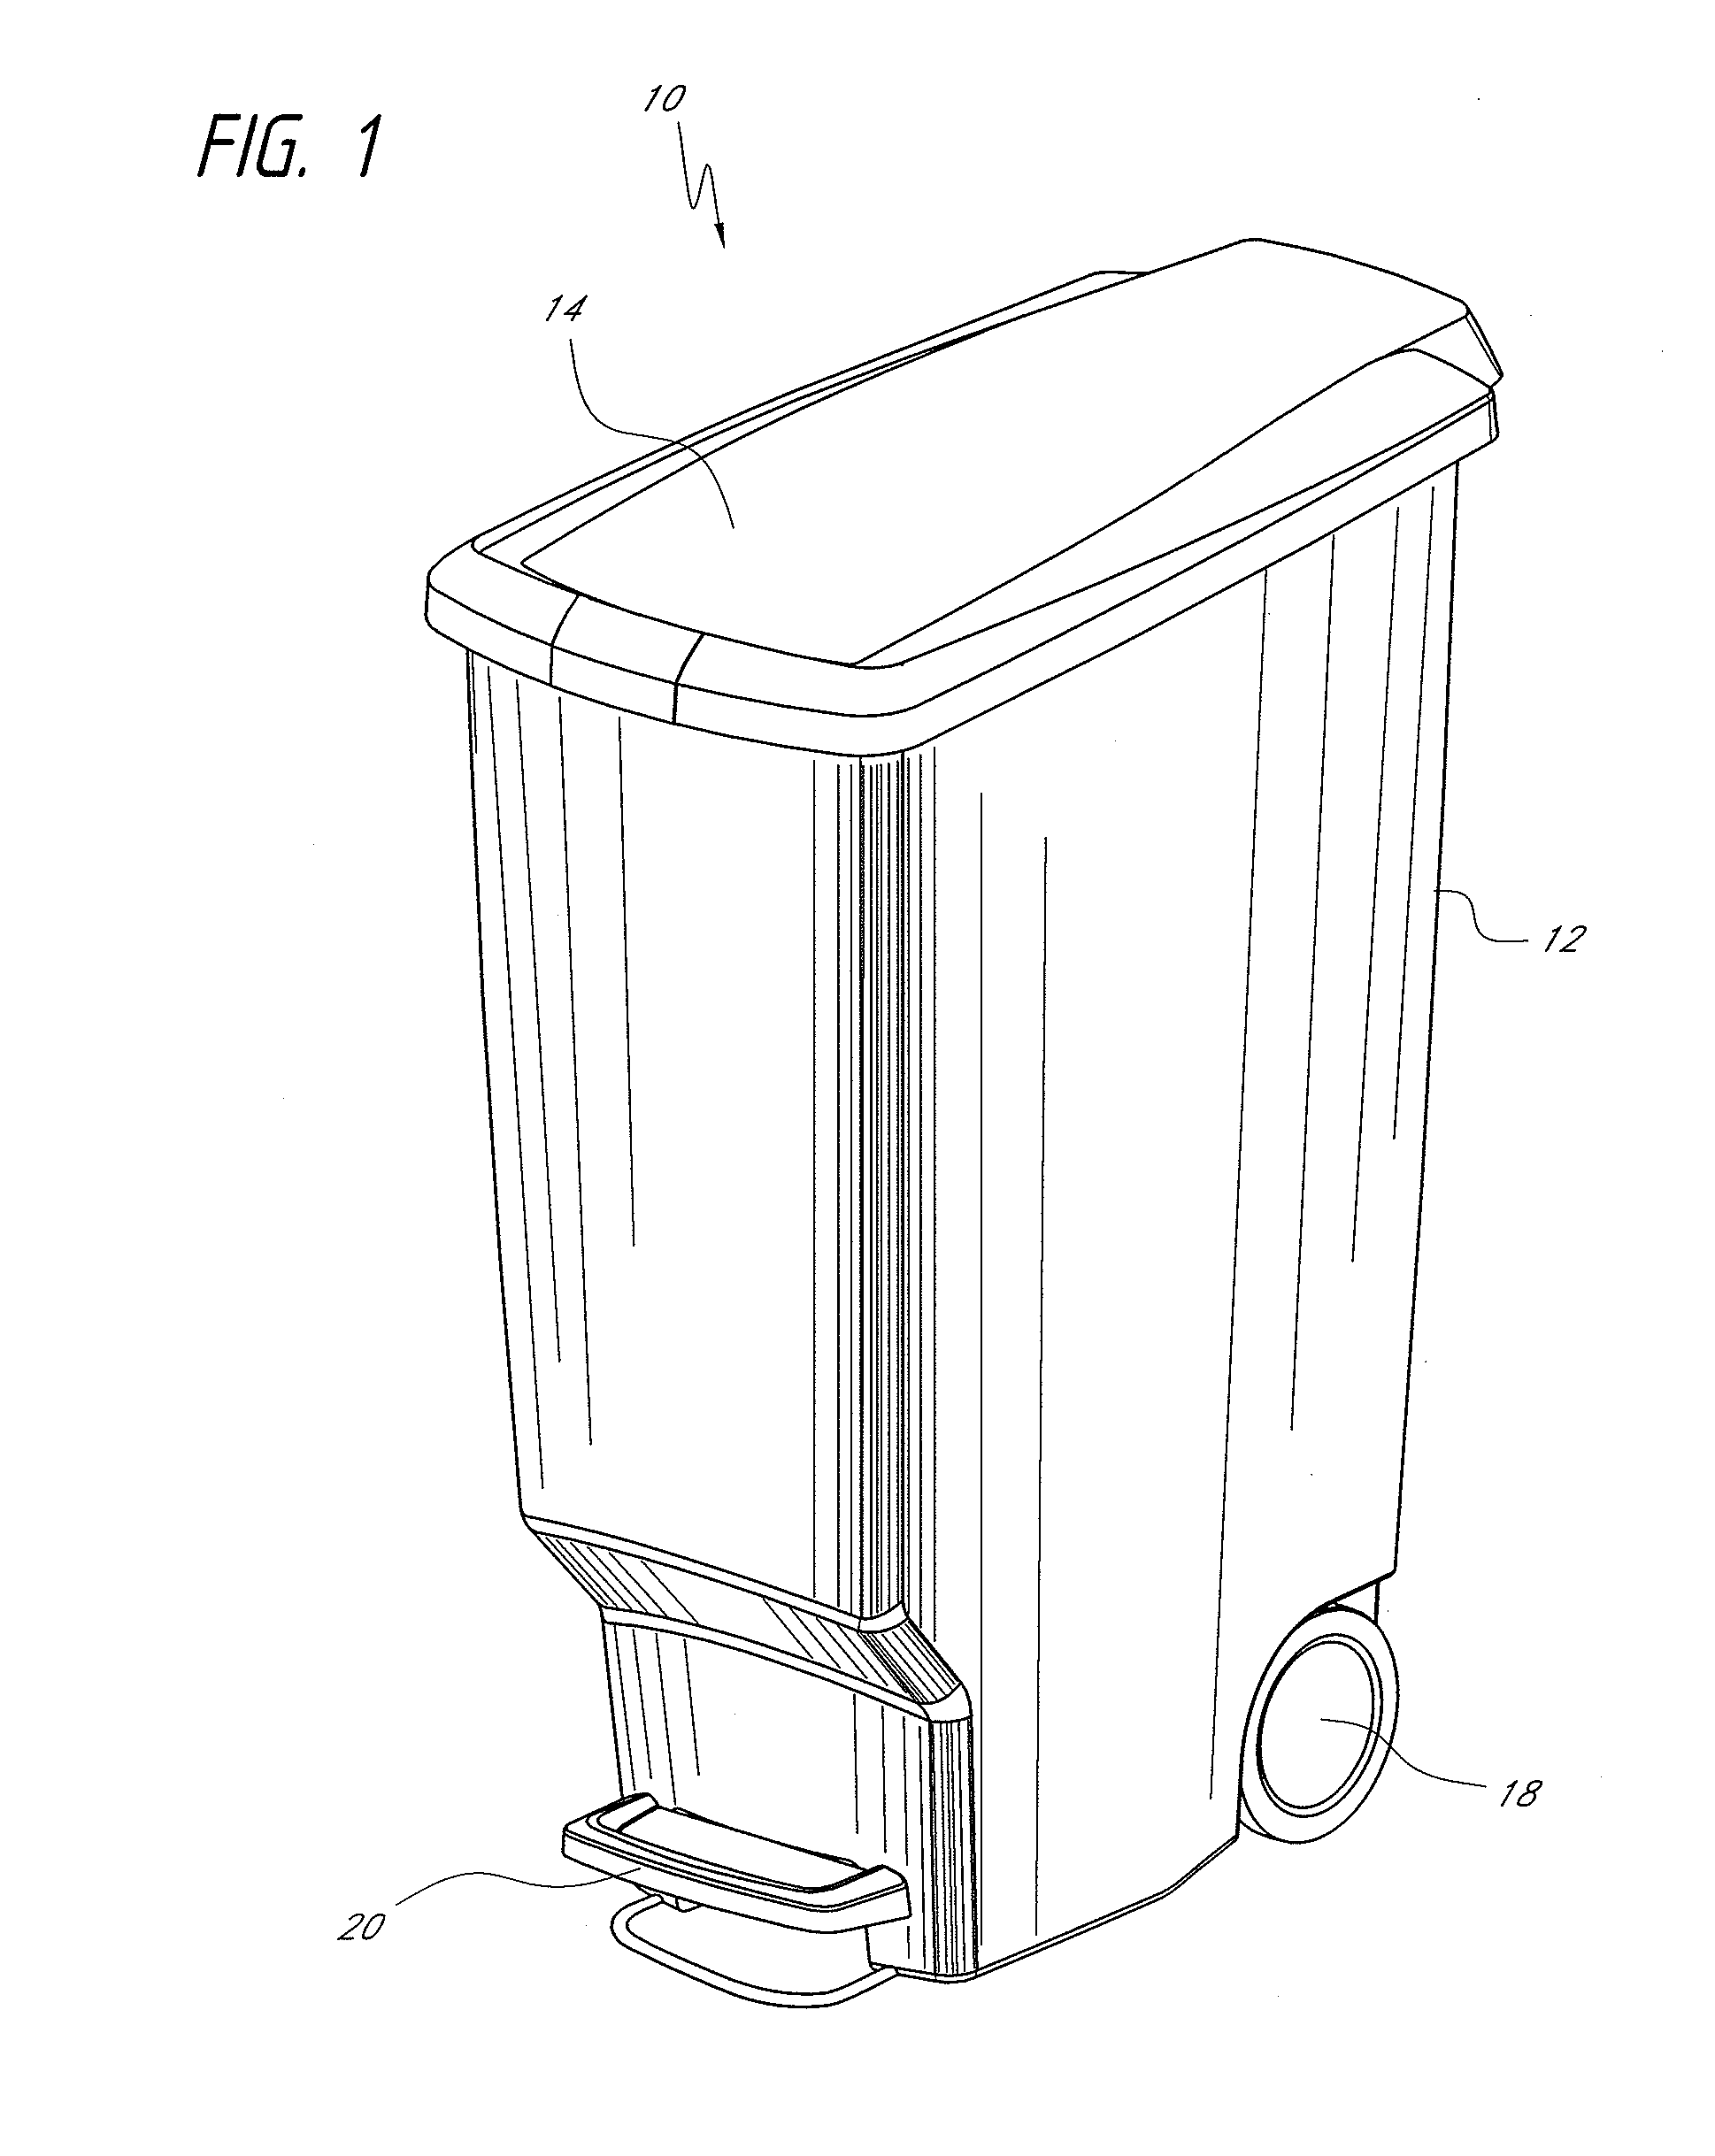 Trash can assembly